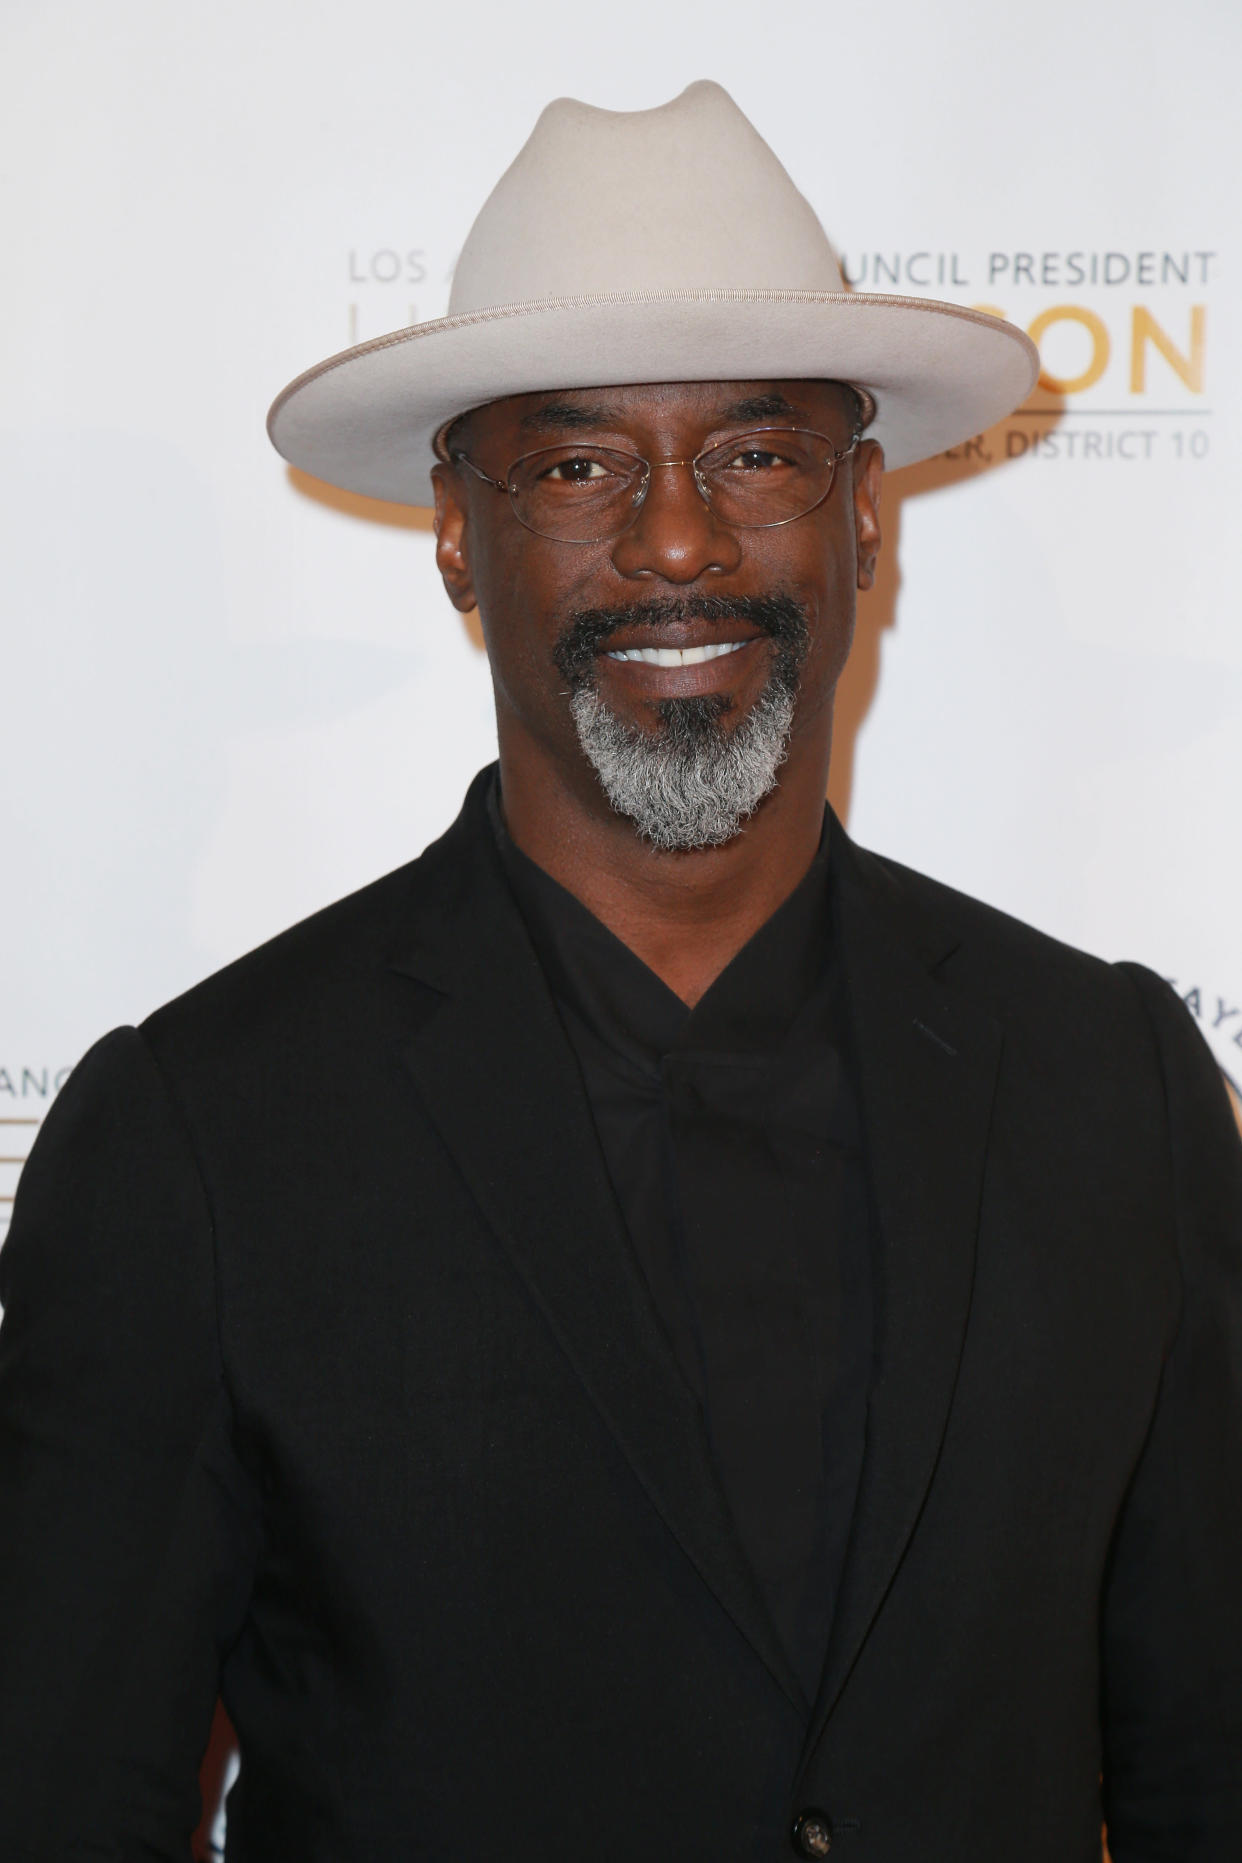 Actor Isaiah Washington visited the Trump White House this week. (Photo: Leon Bennett/Getty Images)